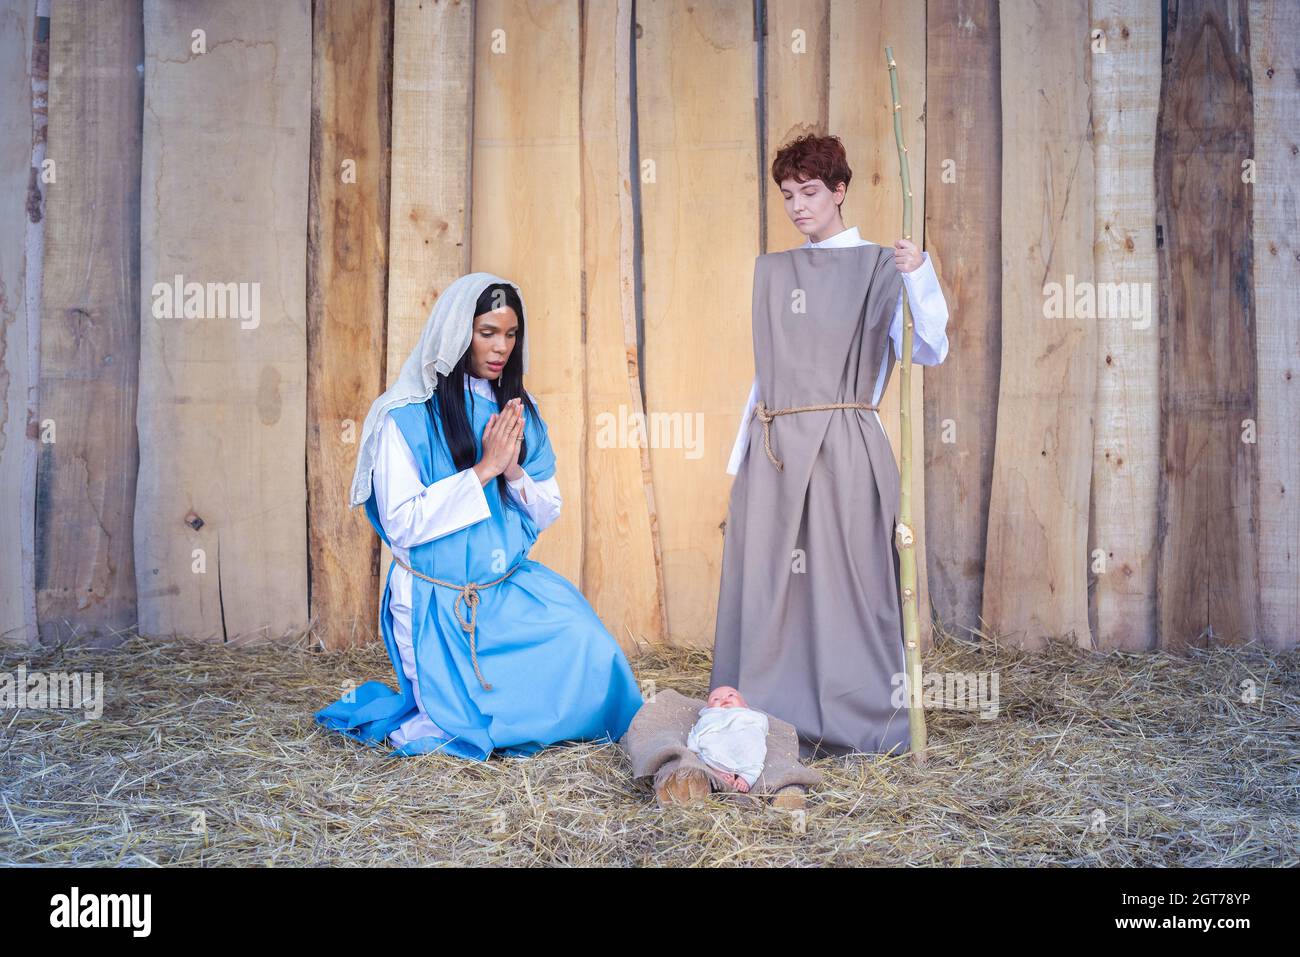 Christmas crib with two transgender people representing mary and joseph Stock Photo